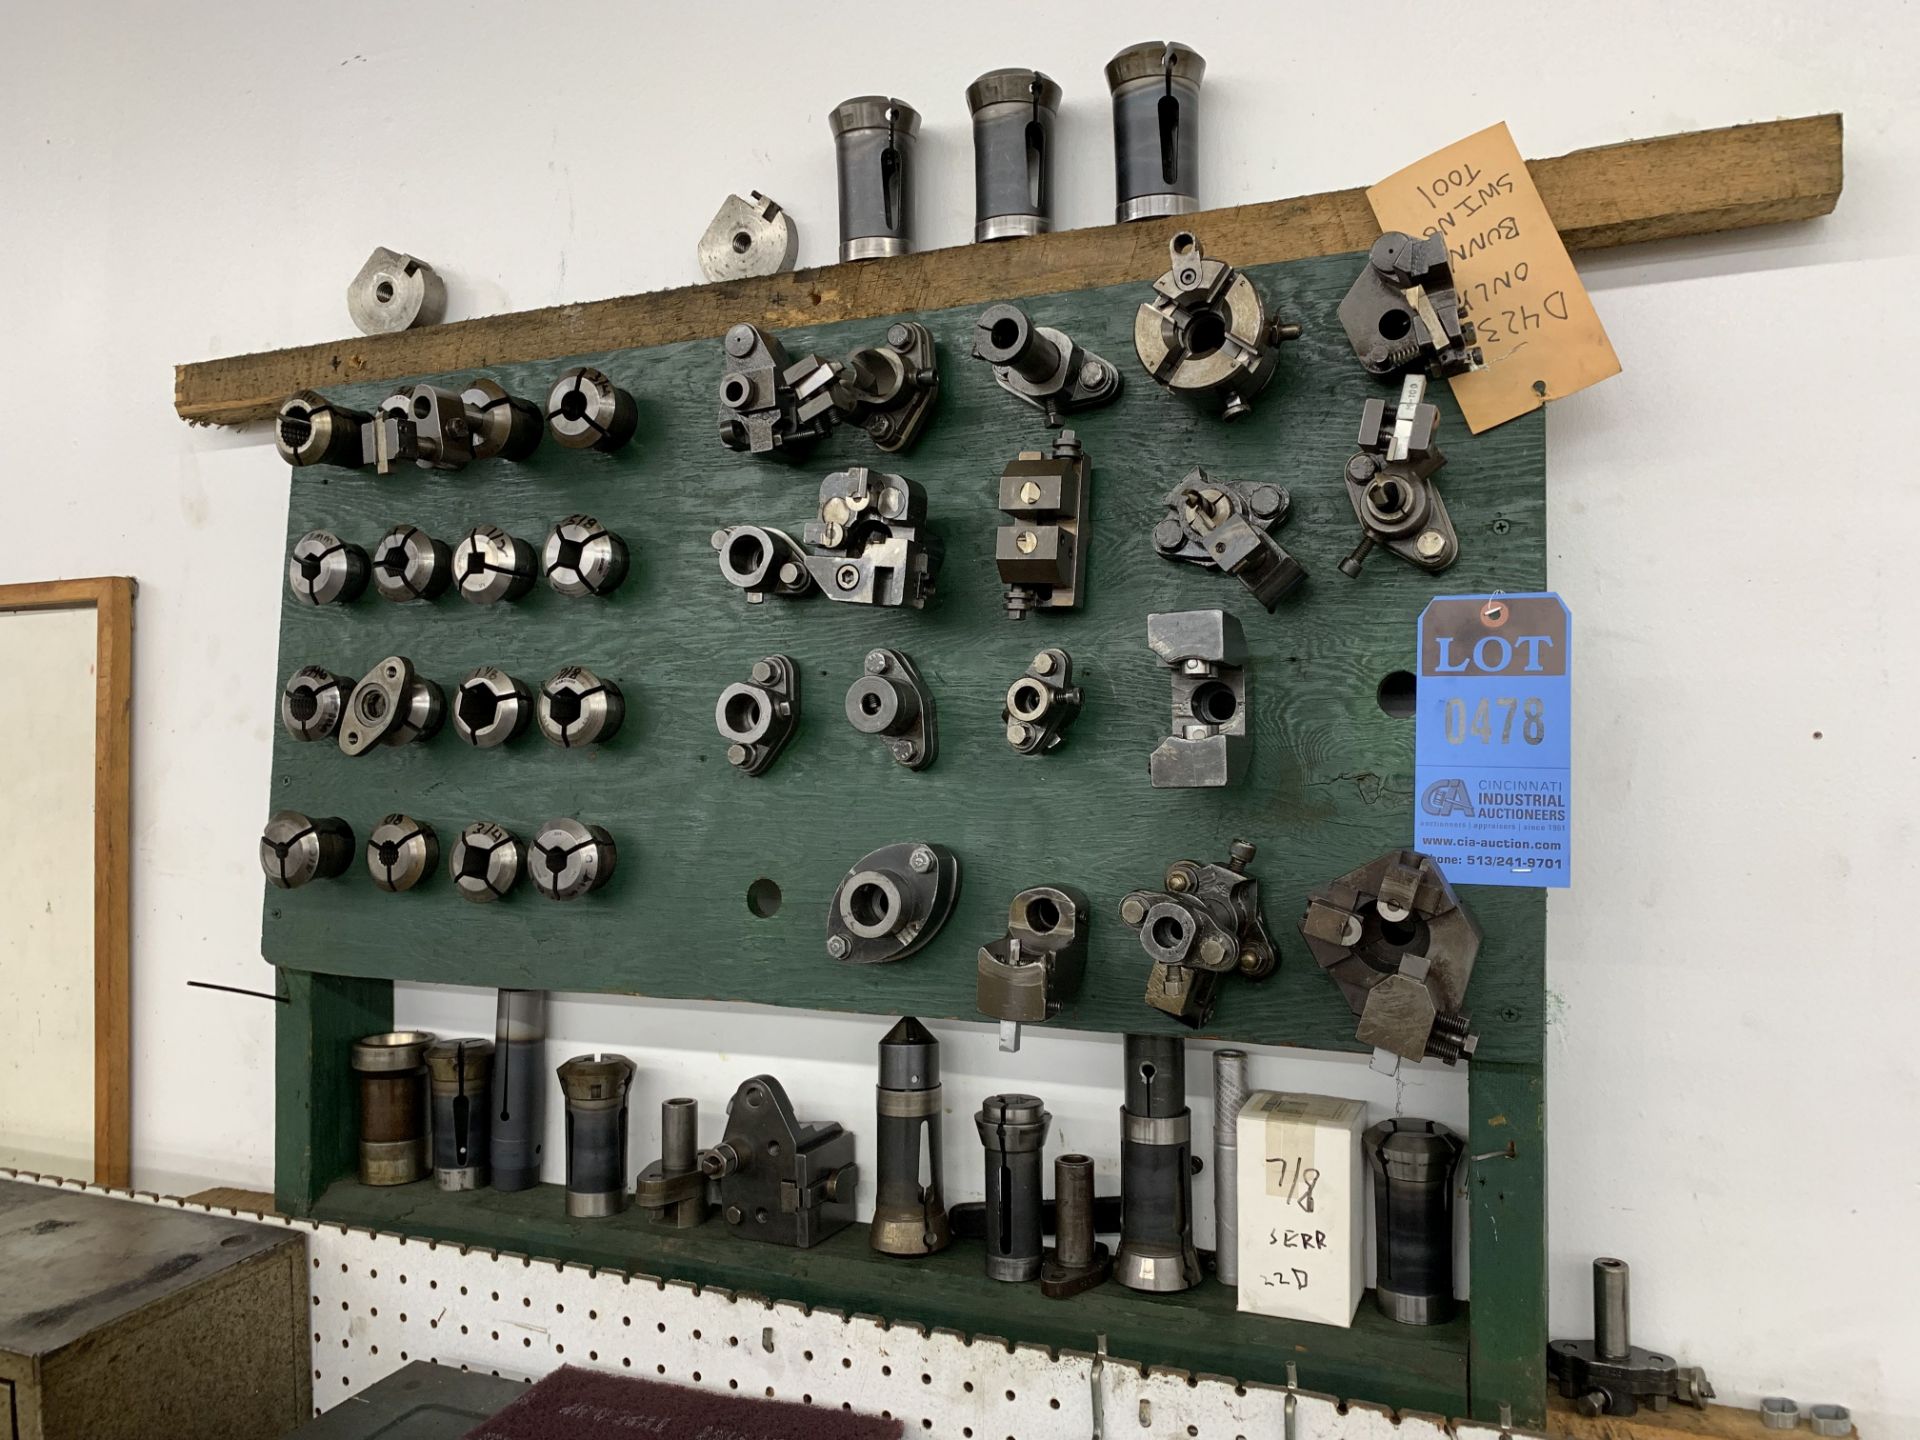 (LOT) DAVENPORT TOOLHOLDERS, COLLETS, TOOLING AND MACHINE PARTS - Image 2 of 5